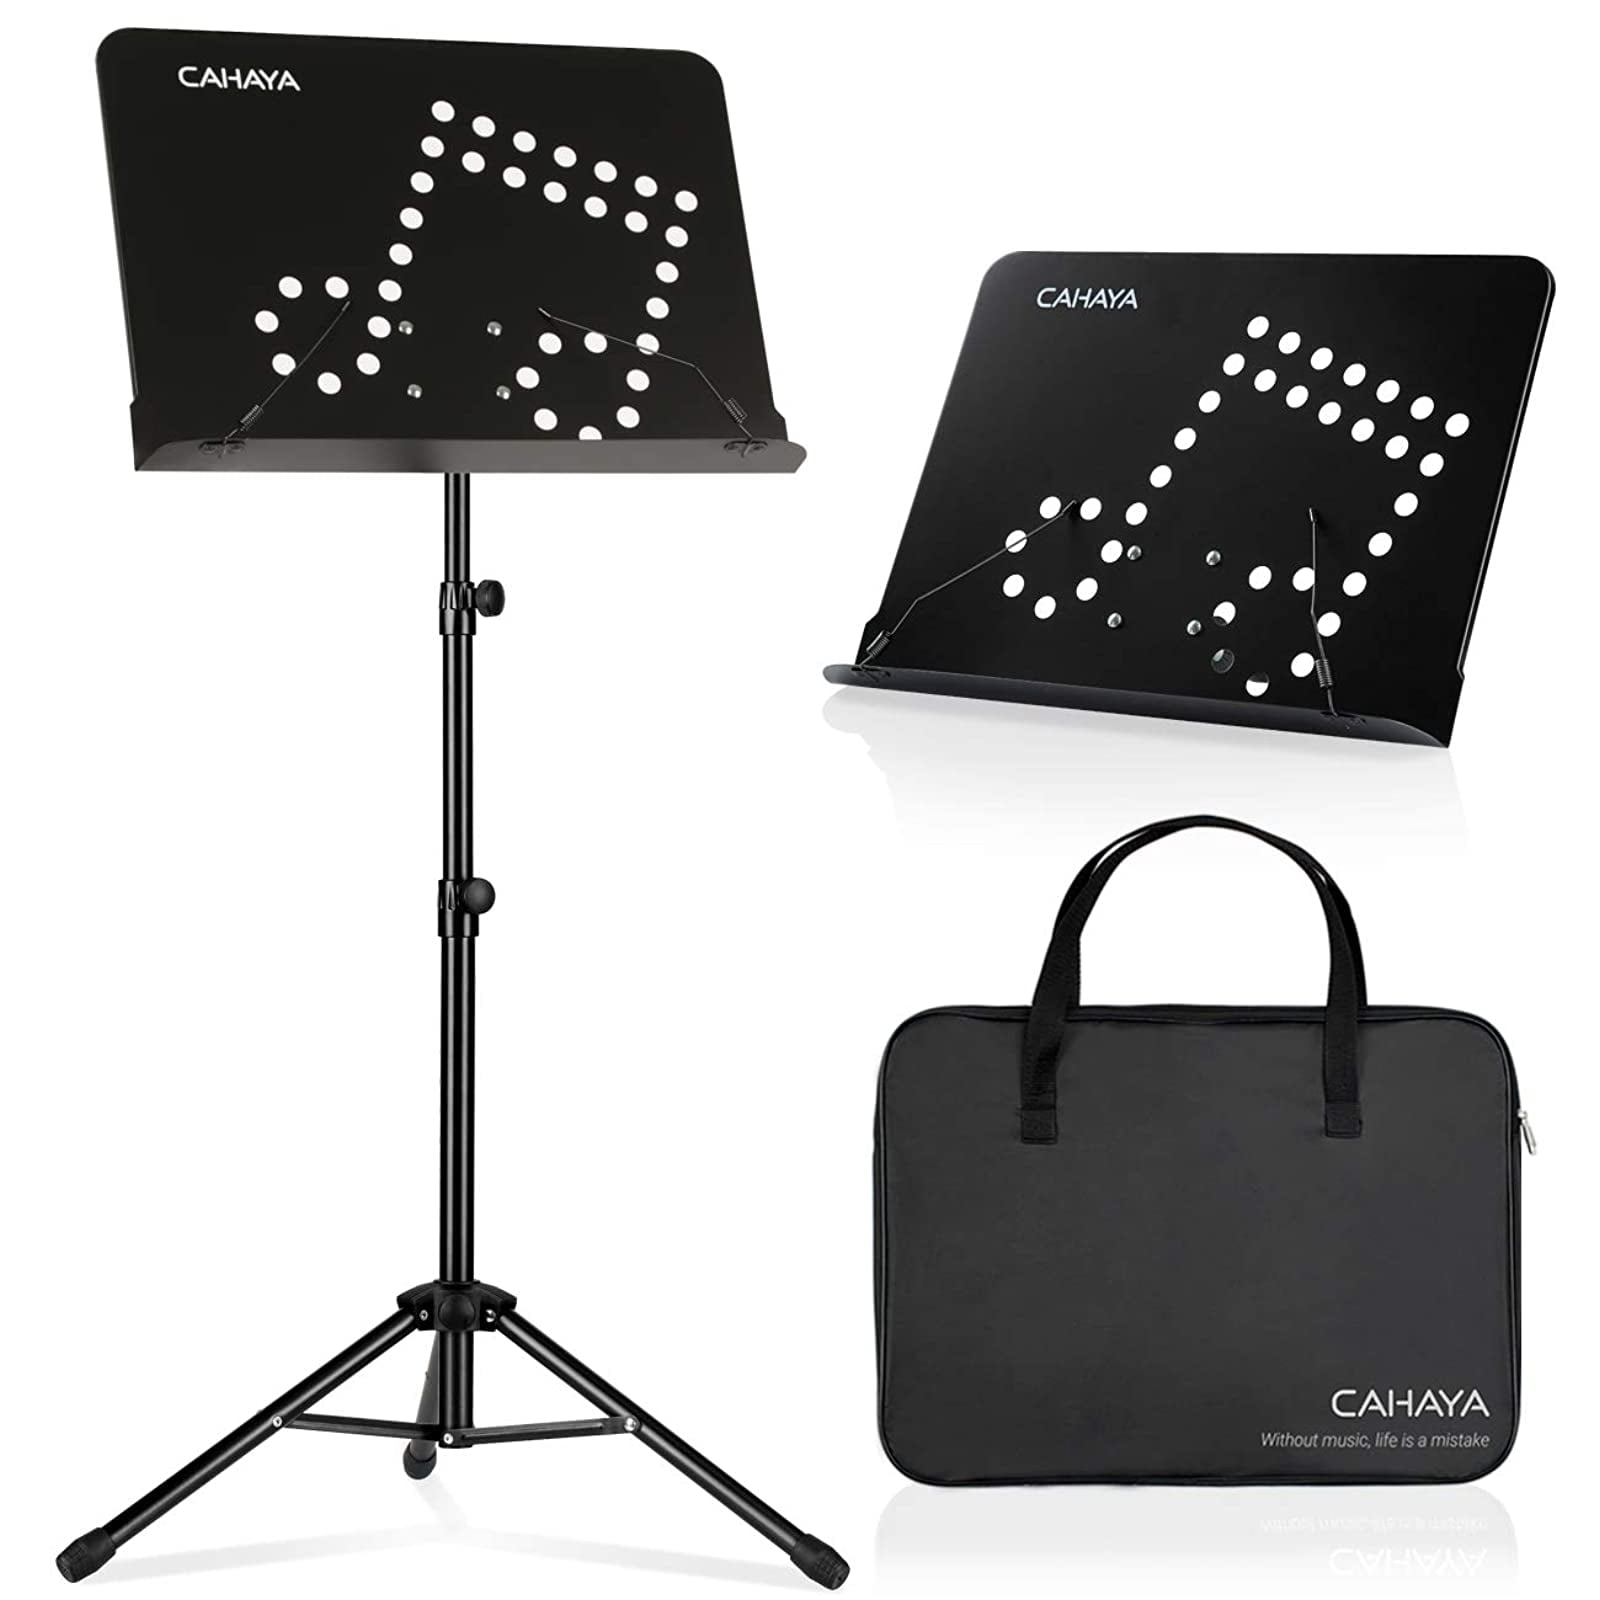 CAHAYA Sheet Music Stand Folding & Tabletop Music Stand Portable with Carrying Bag for Books Notes Laptop Tablet Pink CY0204 